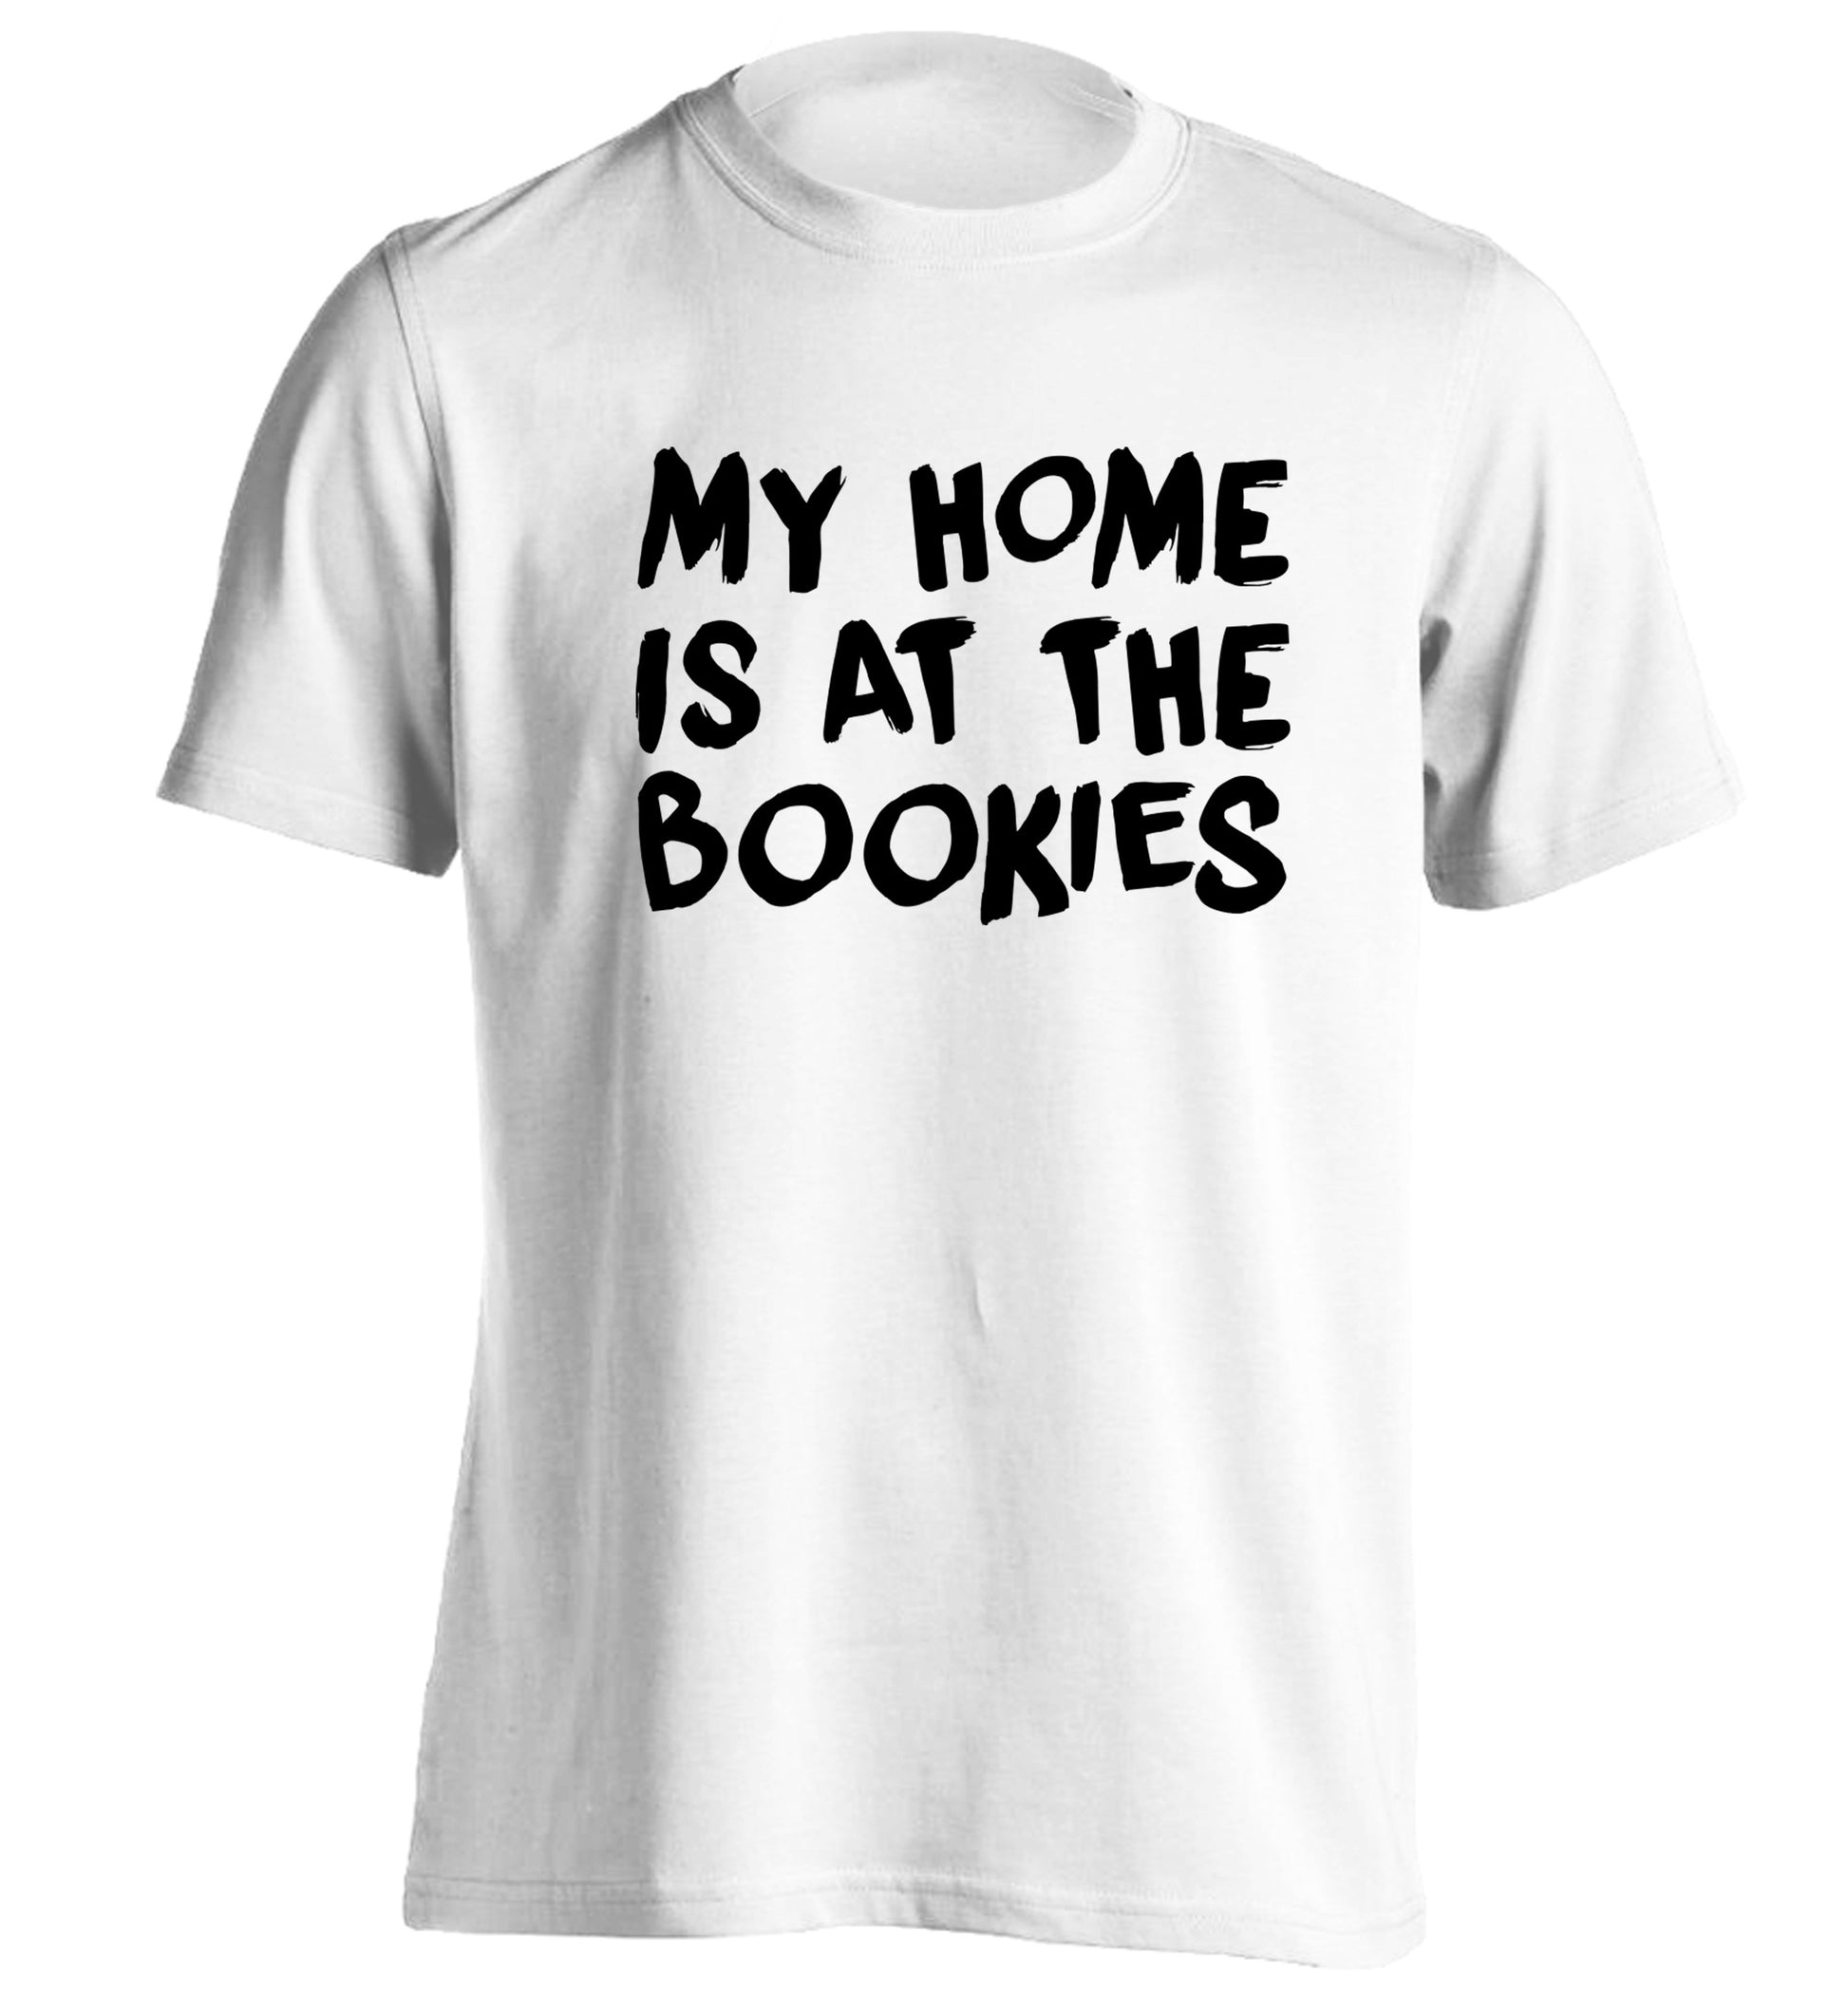 My home is at the bookies adults unisex white Tshirt 2XL